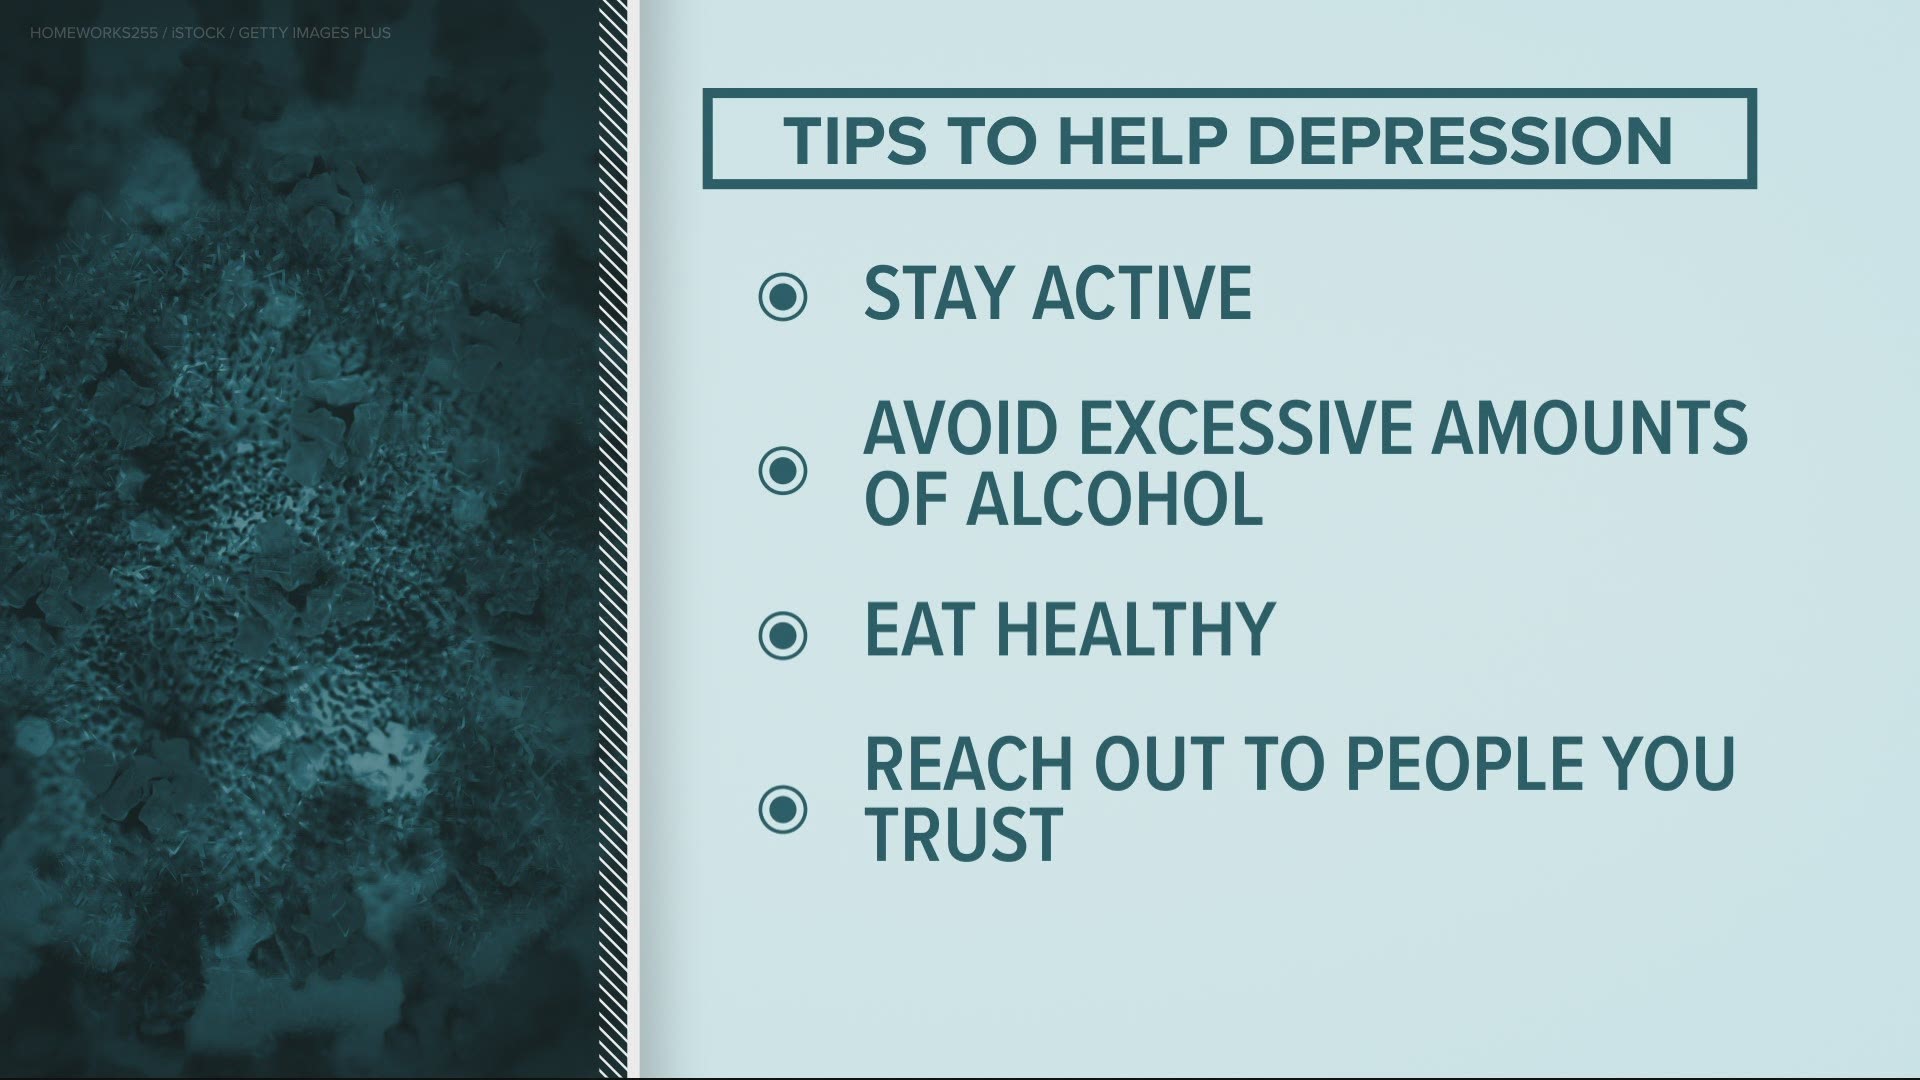 The St. Louis County shared some tips on how to handle the mental effects of the coronavirus